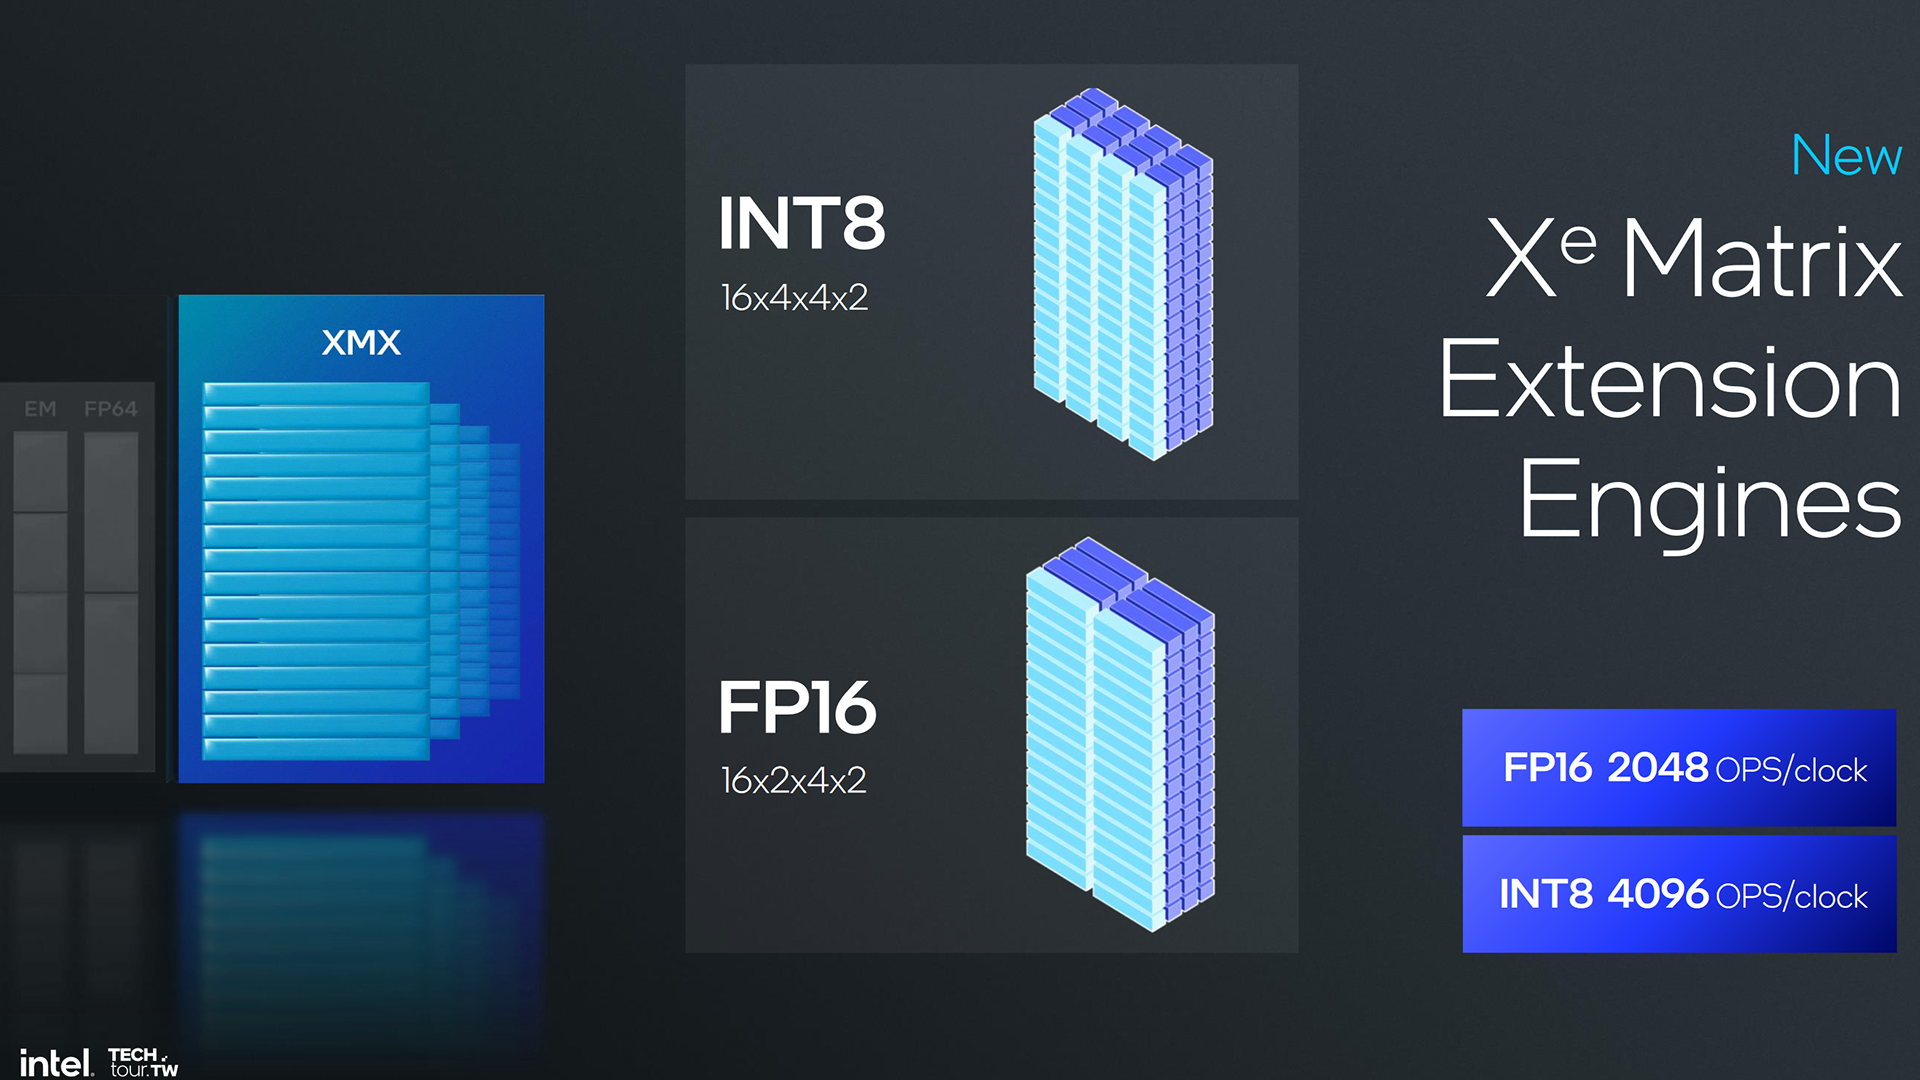 Intel Xe2 architecture detailed in Taiwan.